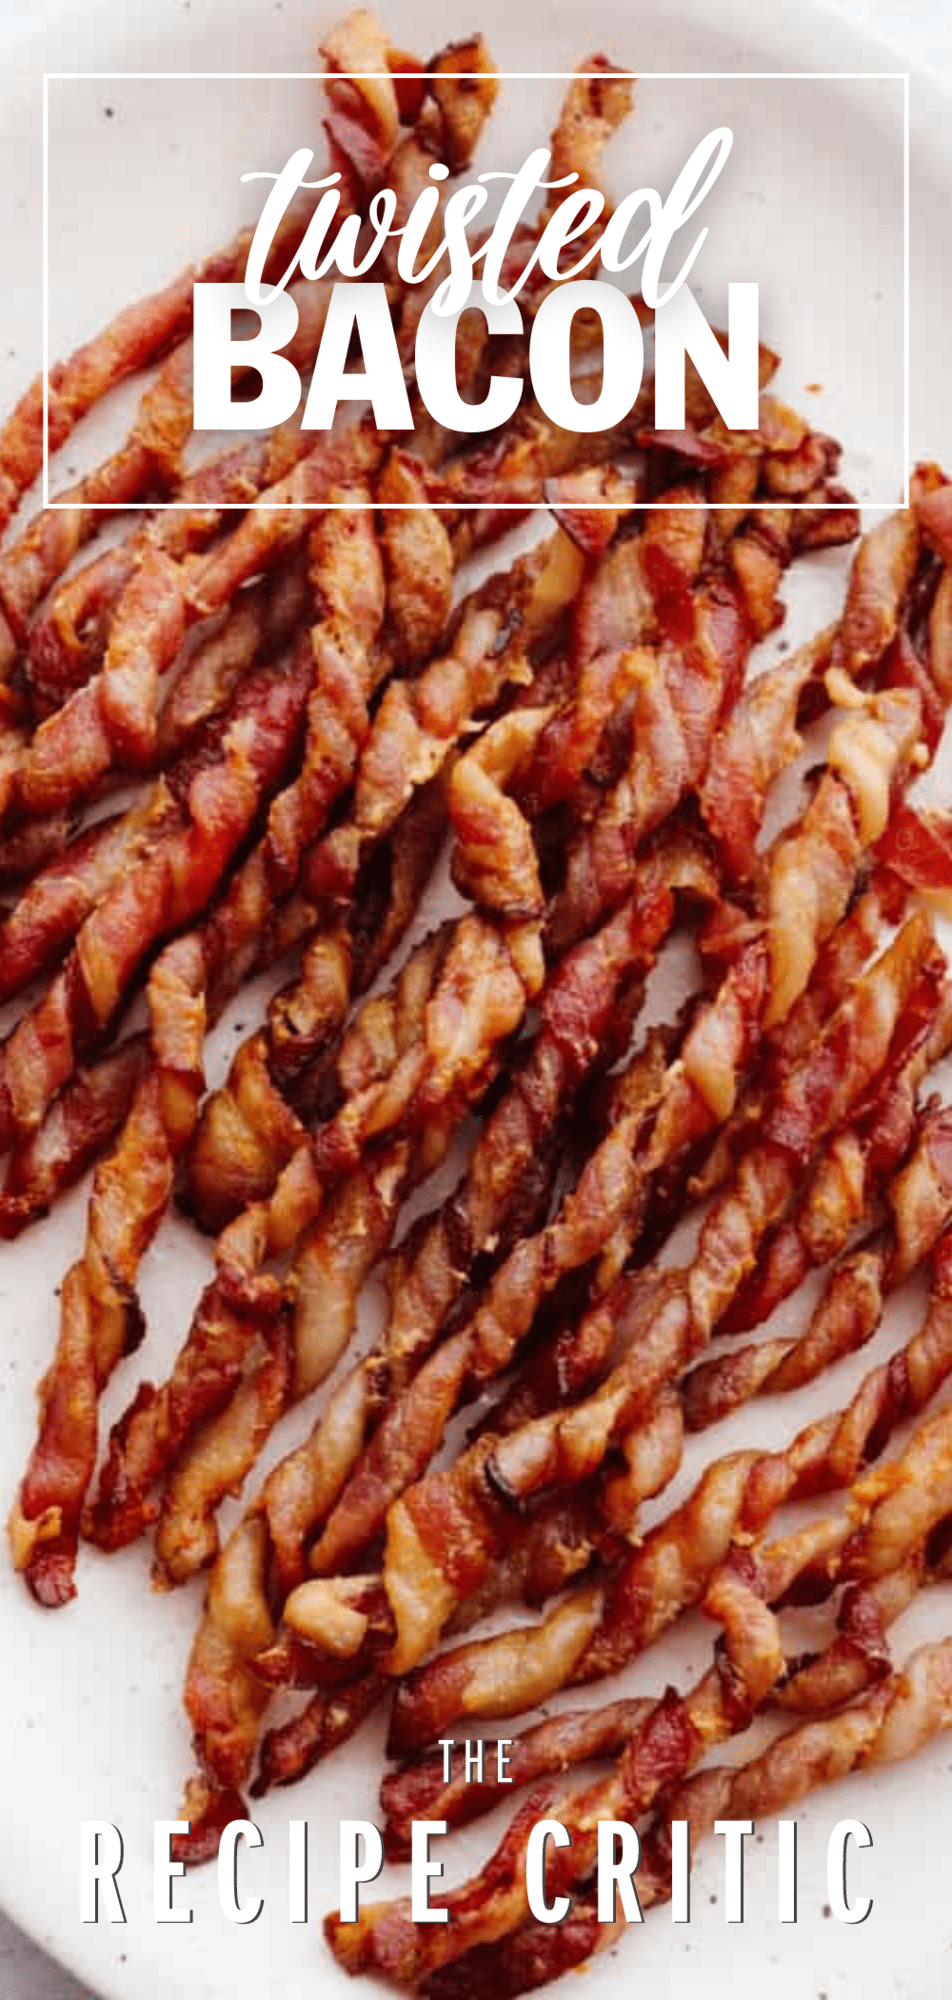 https://therecipecritic.com/wp-content/uploads/2022/04/Twisted-Bacon-Pinterest.png